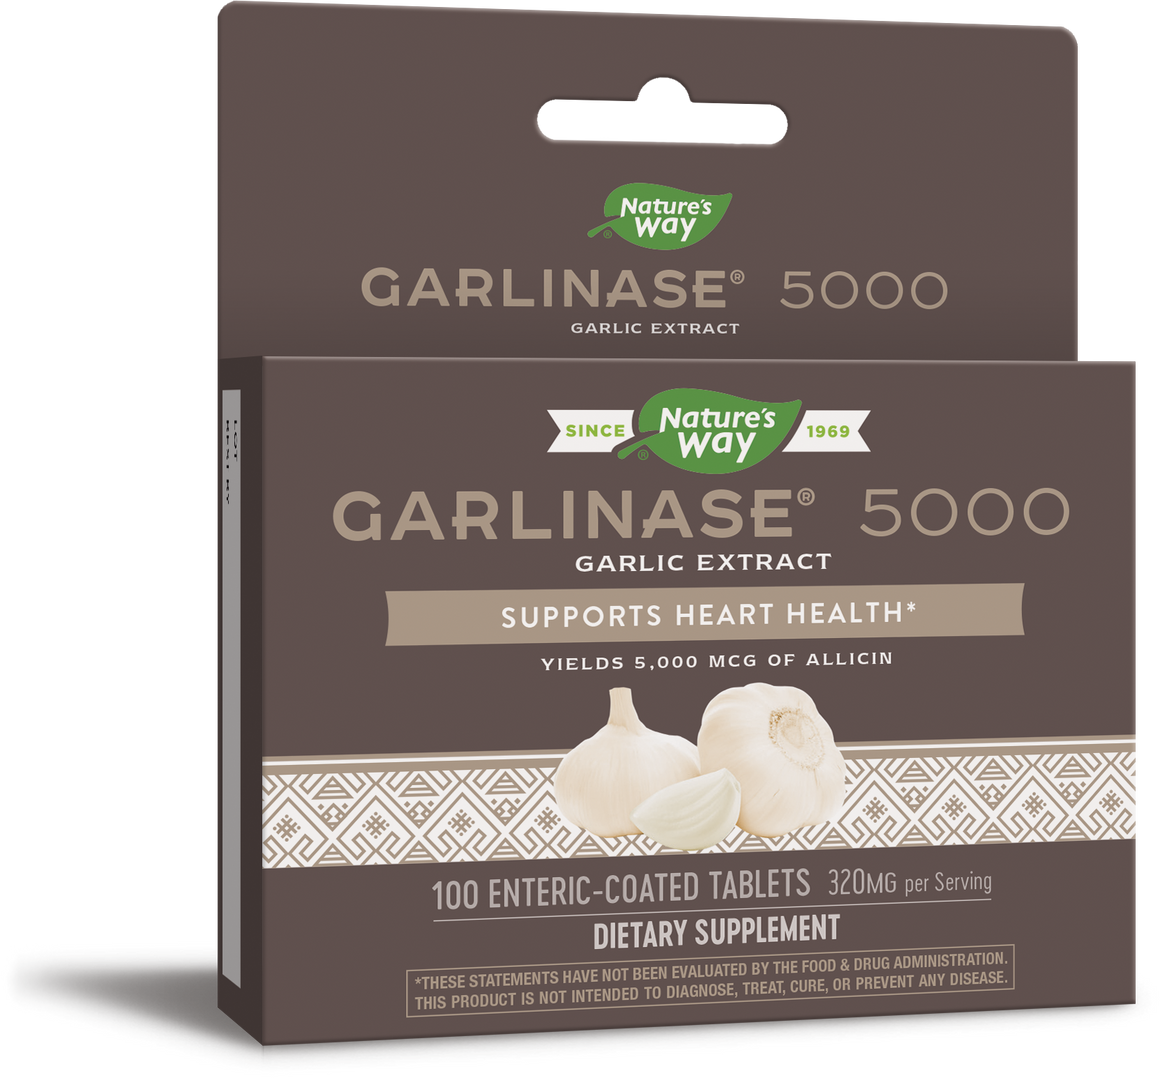 A package for Nature's Way Garlinase® 5000